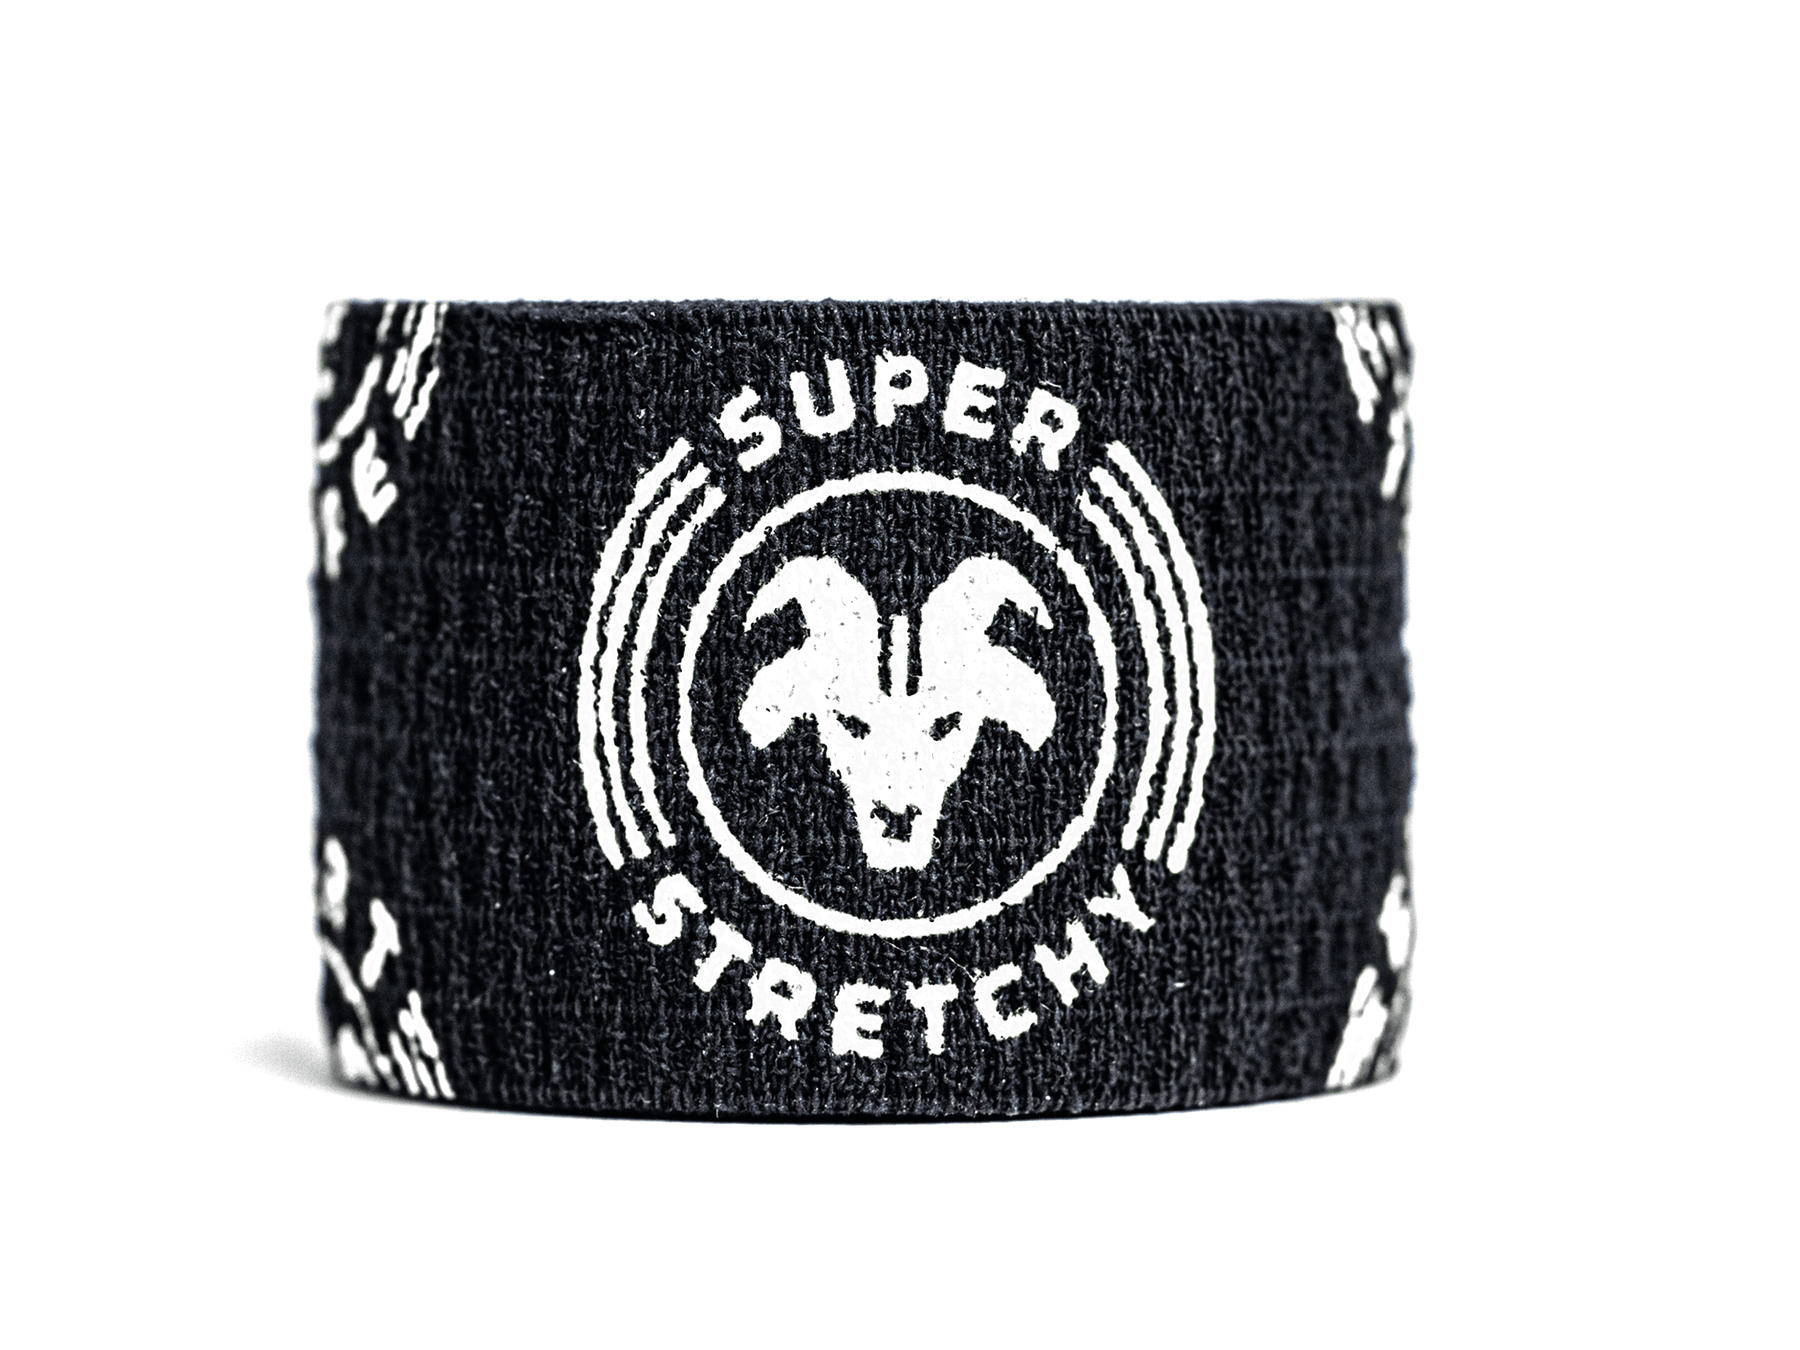 Goat Tape Scary Sticky Premium Athletic Tape | Weightlifting Tape | Thumb  Tape for Hook Grip – Sticks with You Through The Toughest Fitness Workouts